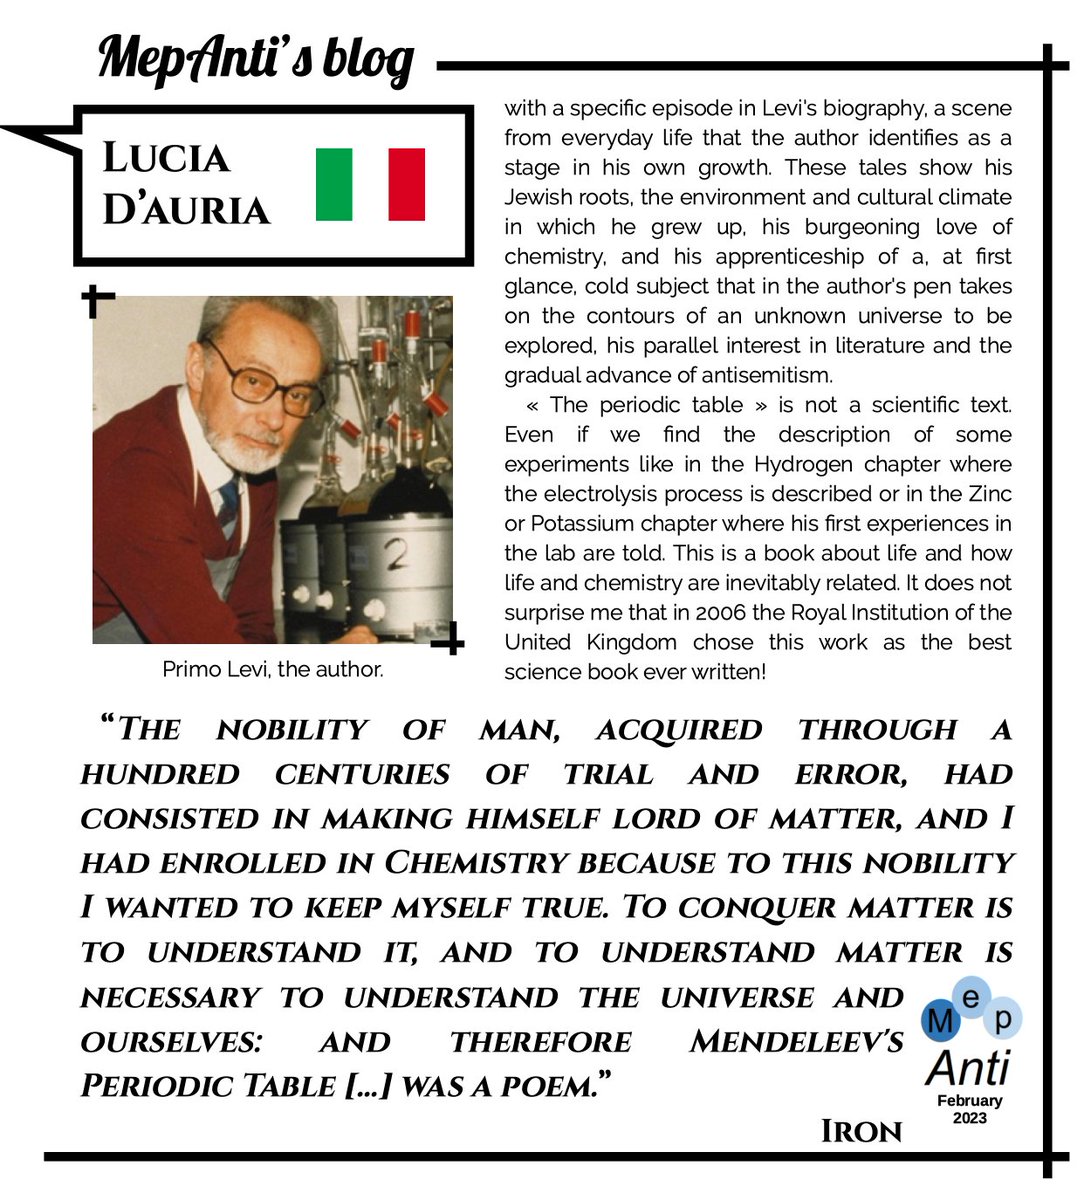 In February, our doctoral student Lucia D'Auria, from Italy, will share some of her favorite books related to science. Today, the focus is on Primo Levi's The Periodic Table (1975).
#MepAntiBlog #ThePeriodicTable #PrimoLevi #Chemistry  #BestScienceBook #LordOfMatter #MepAnti_ITN